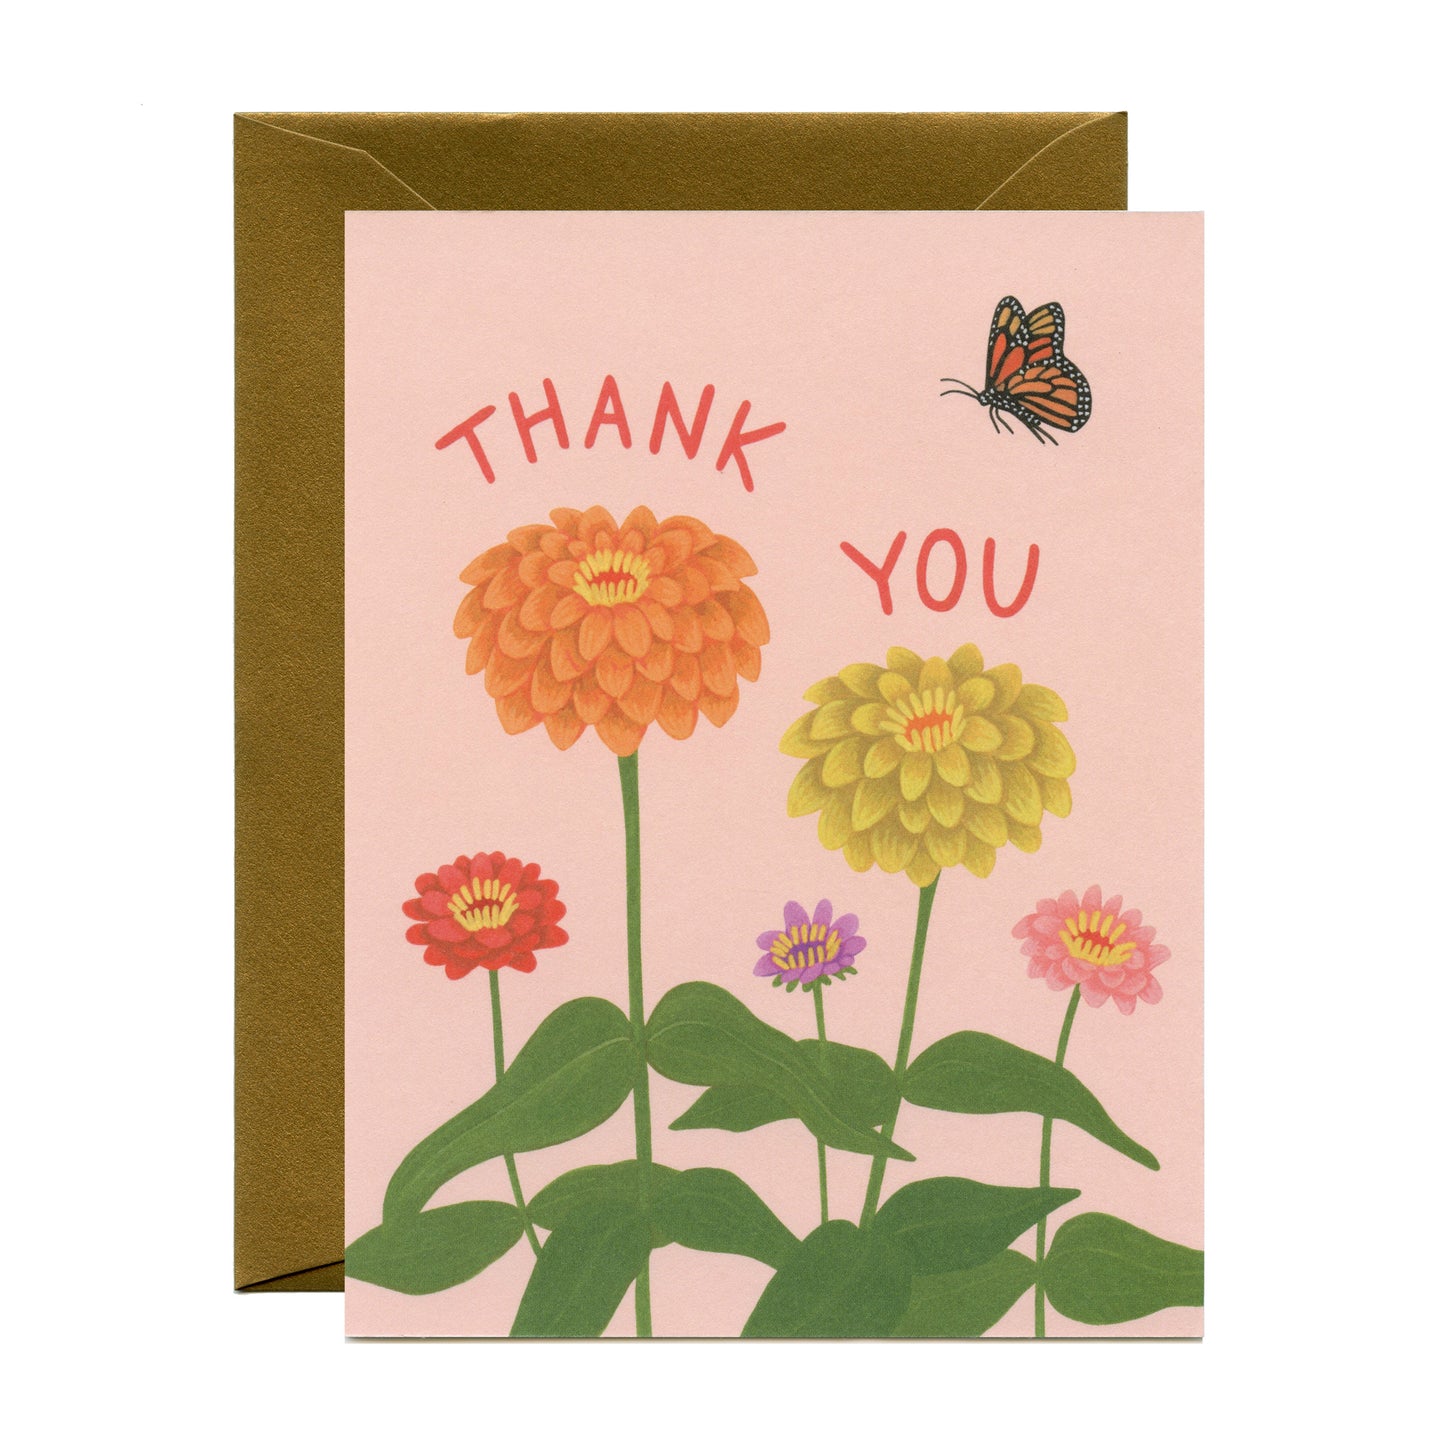 ZINNIA FLOWER AND MONARCH BUTTERFLY - THANK YOU GREETING CARDS, BOXED SET OF 8